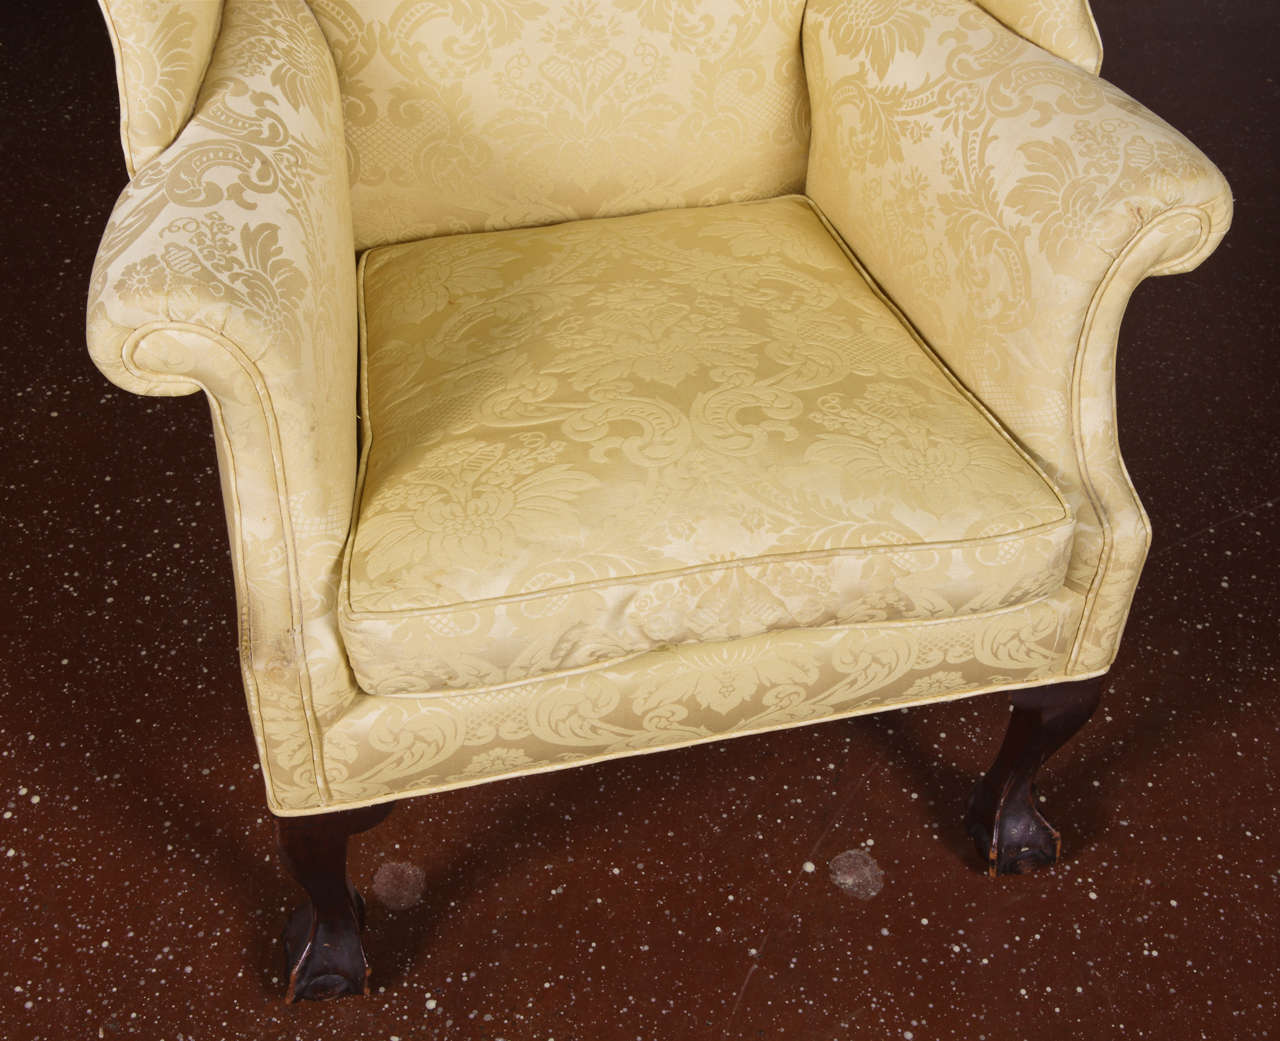 19th Century American Queen Anne Style Wingback Armchair 4